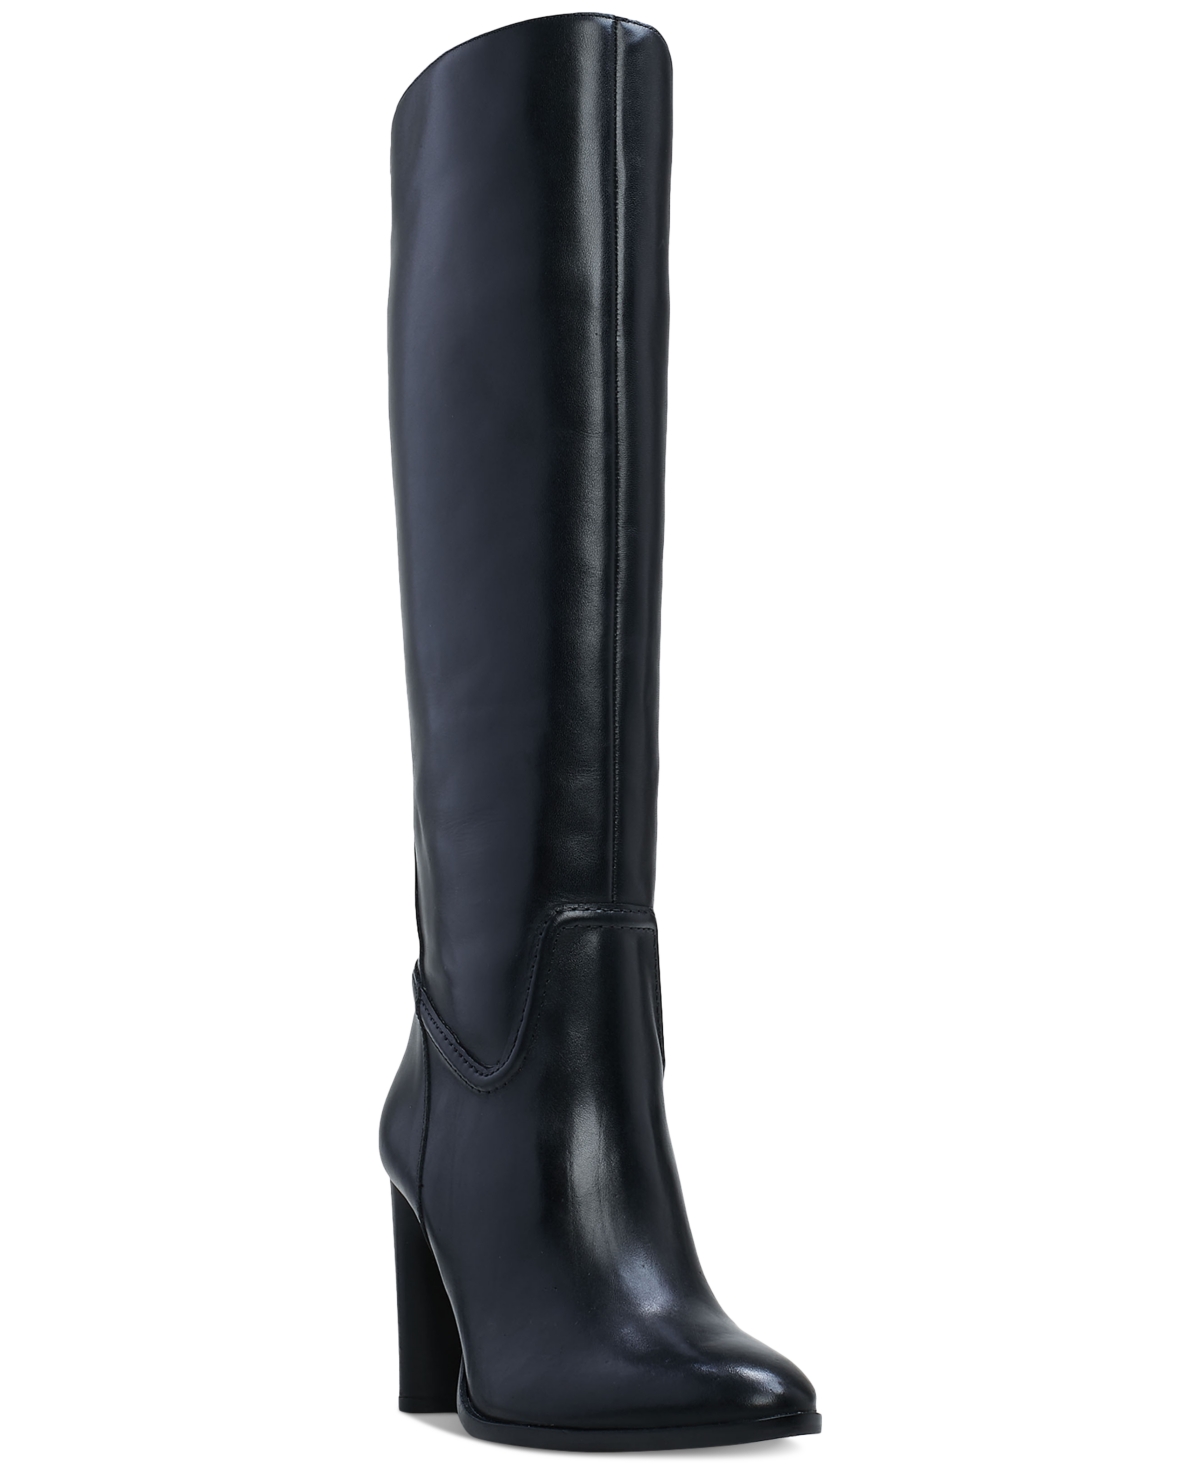 VINCE CAMUTO WOMEN'S EVANGEE KNEE-HIGH DRESS BOOTS